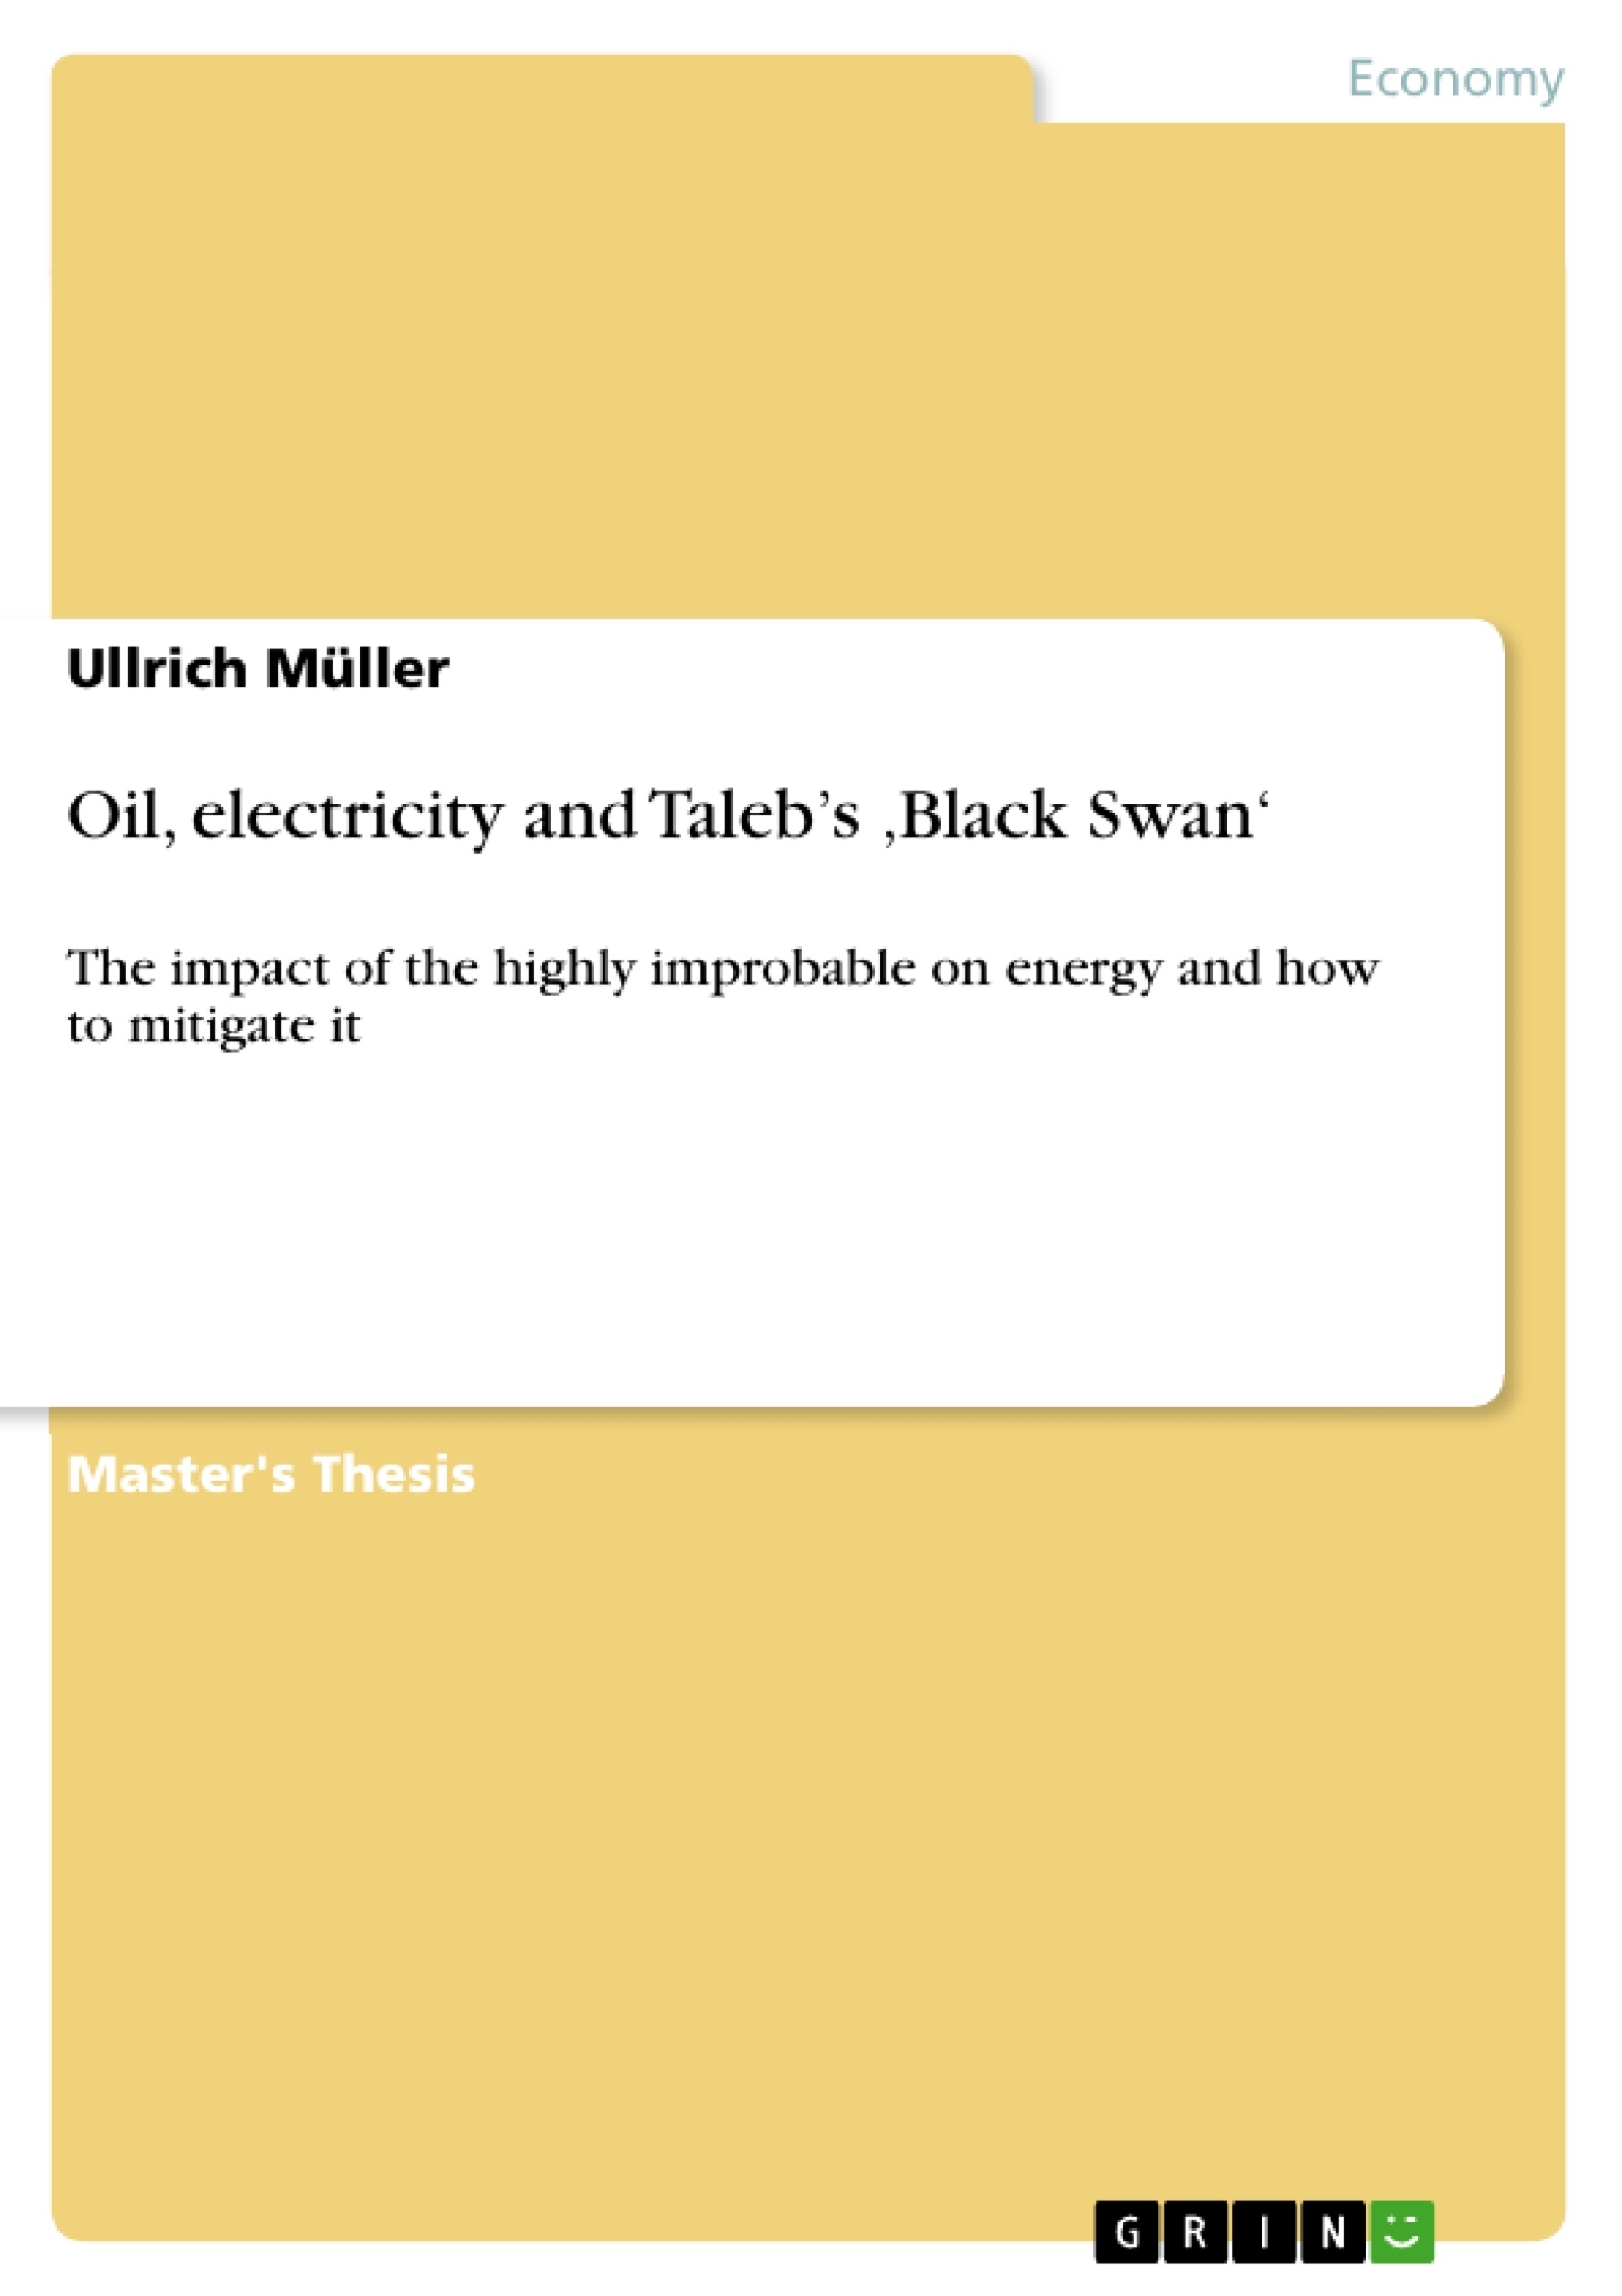 Titre: Oil, electricity and Taleb’s ‚Black Swan‘